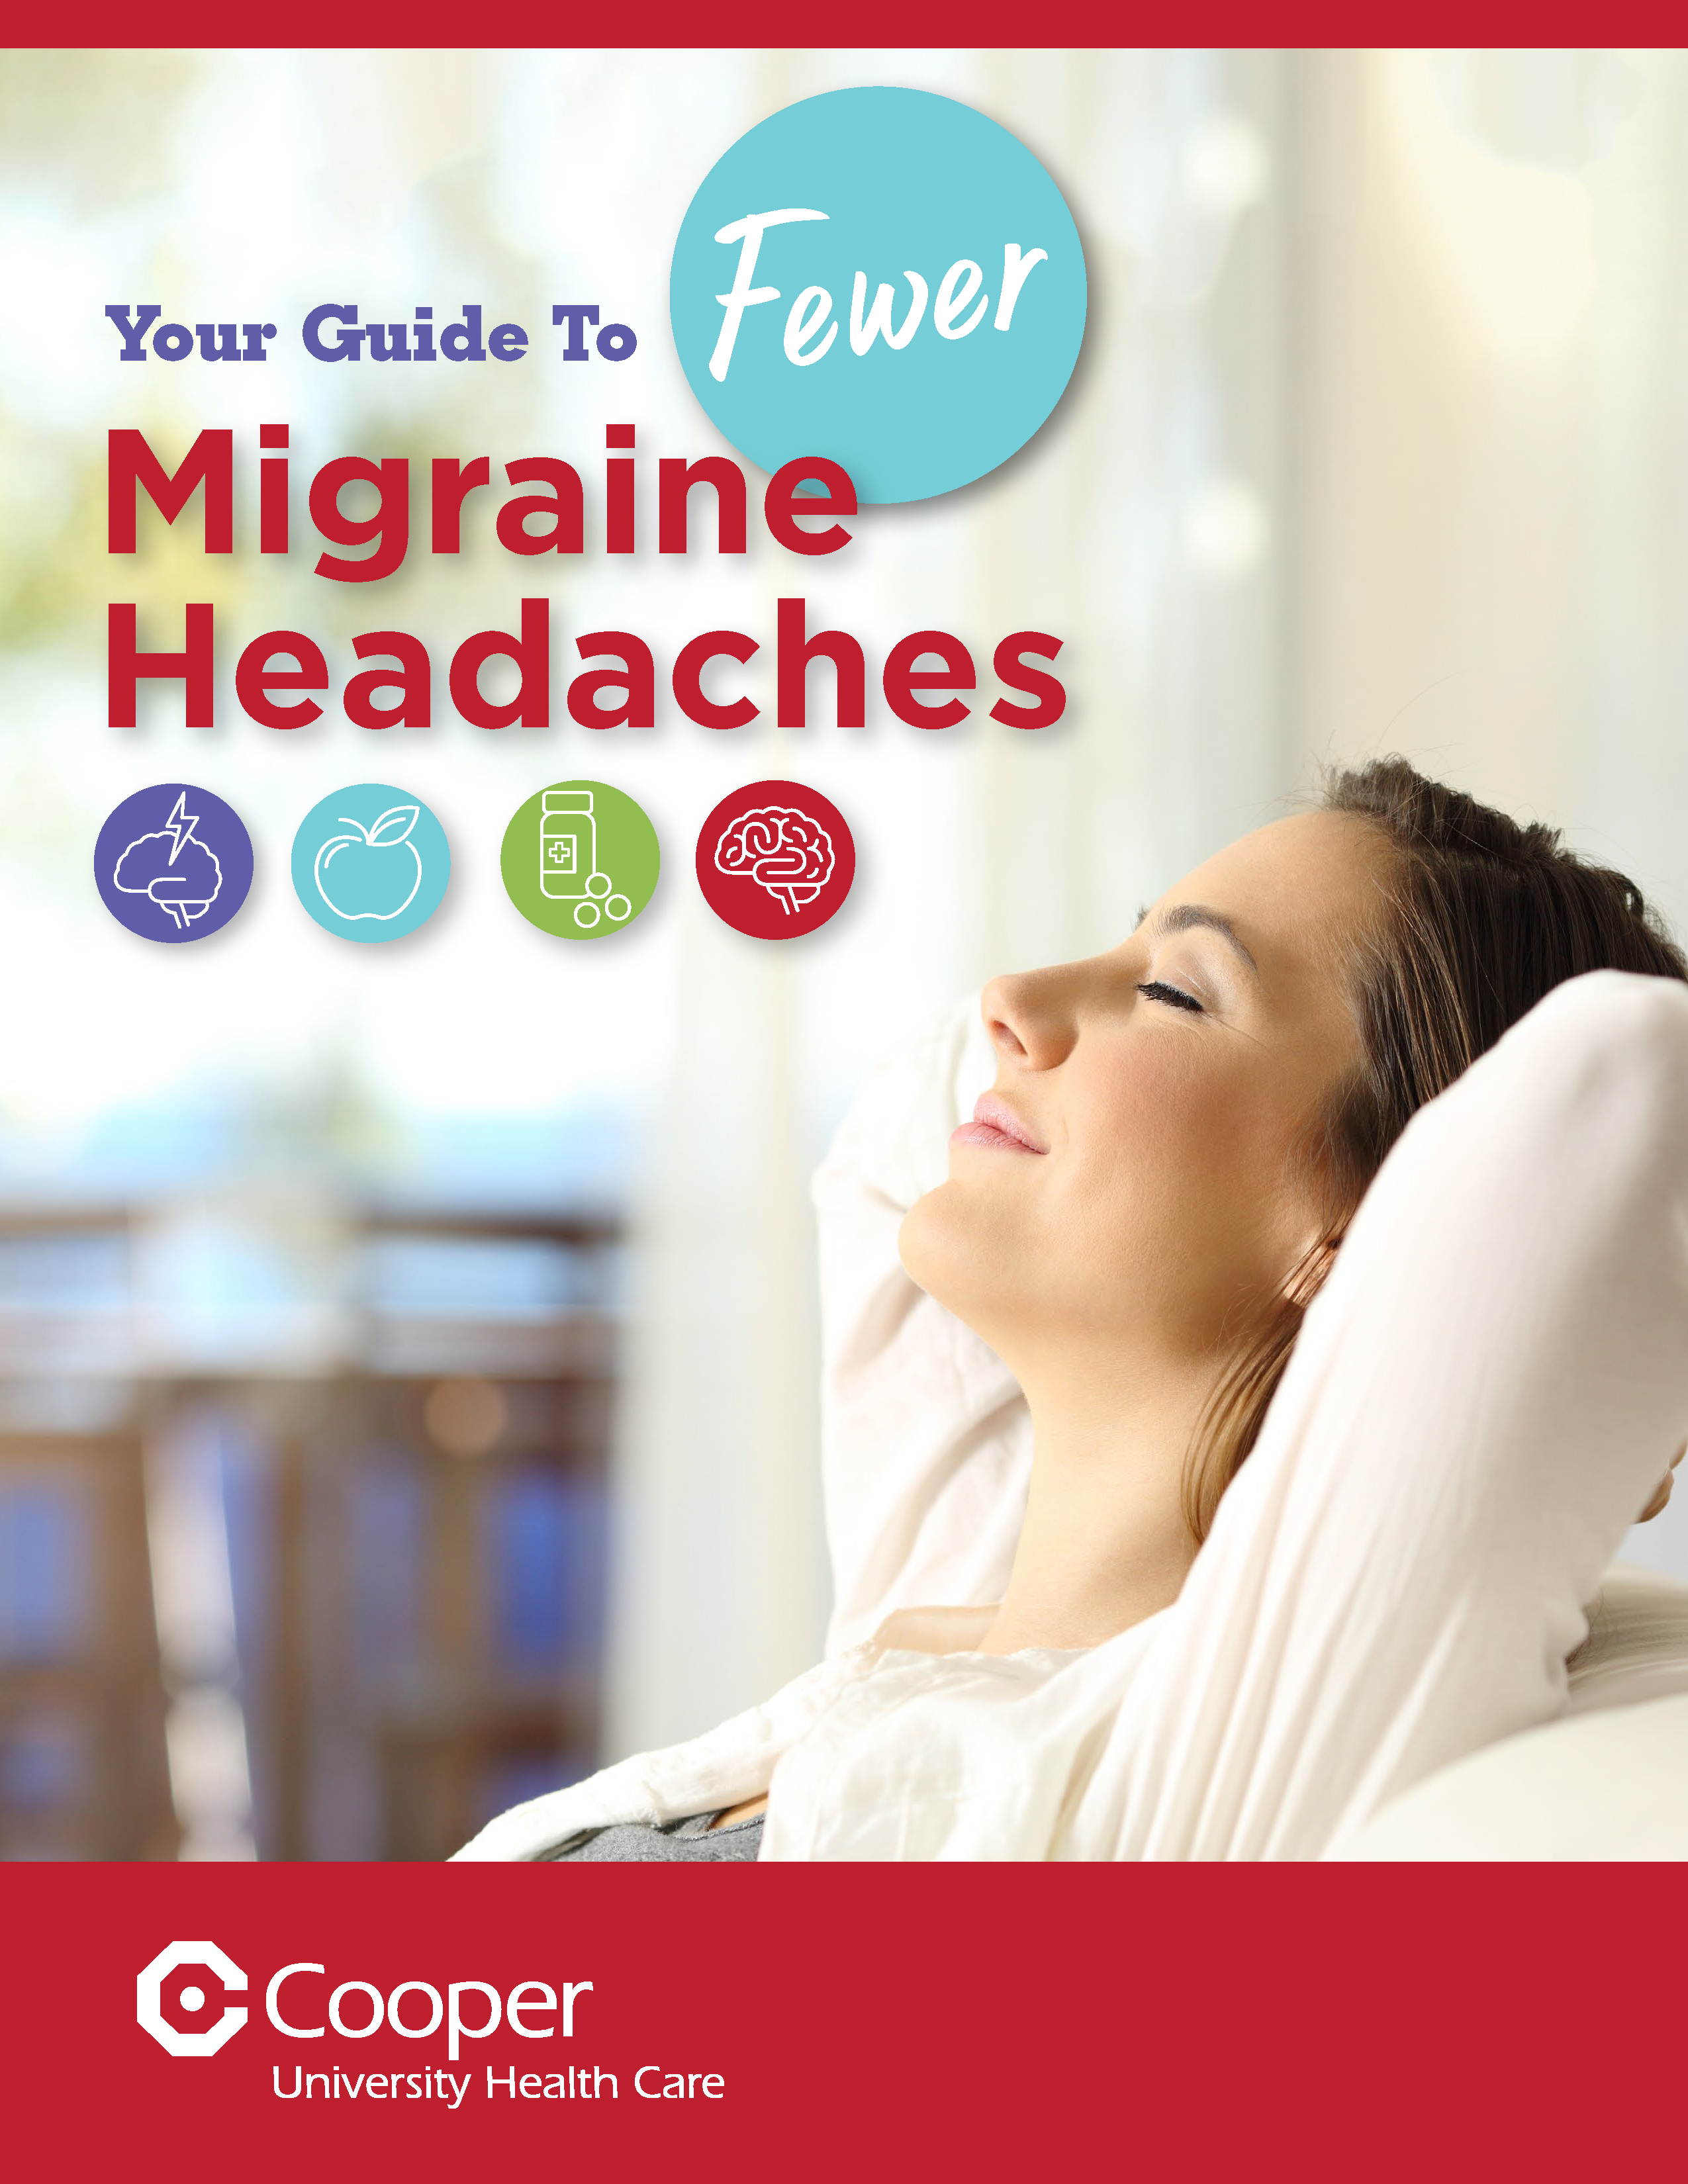 Cover: Your Guide to Fewer Migraine Headaches